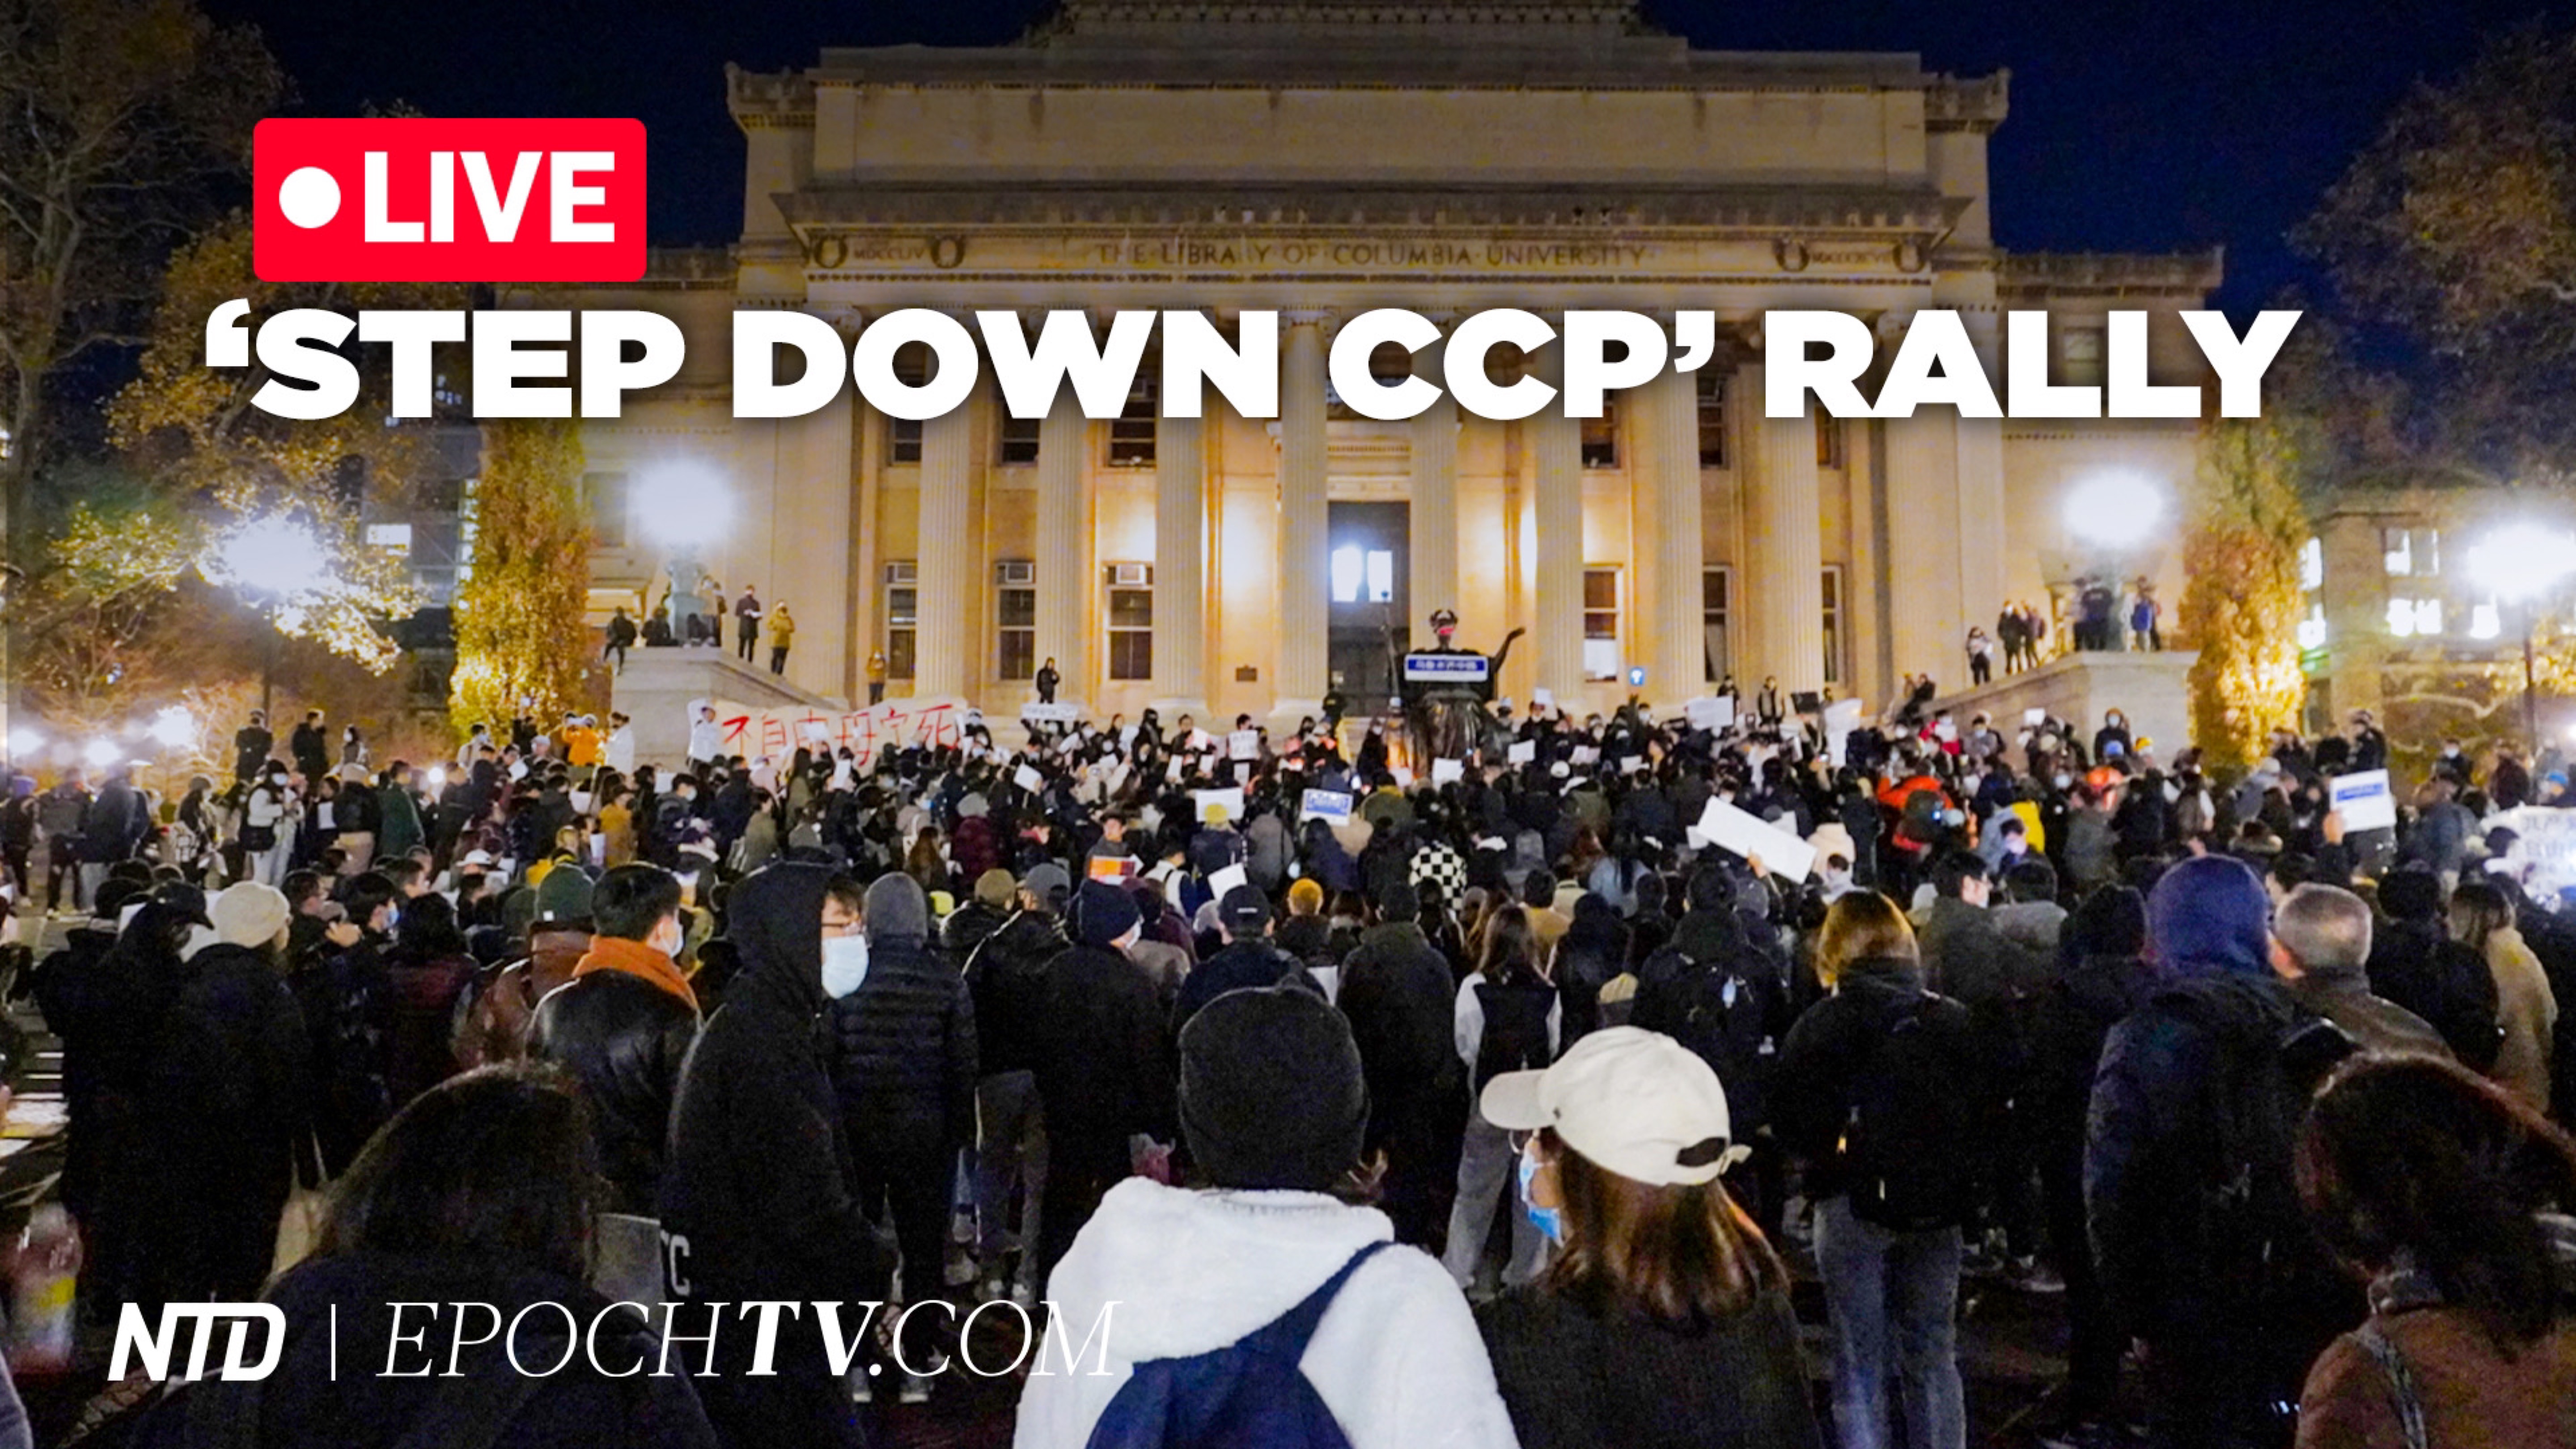 Groups Oppressed by CCP Unite & Protest CCP’s Tyranny in NYC